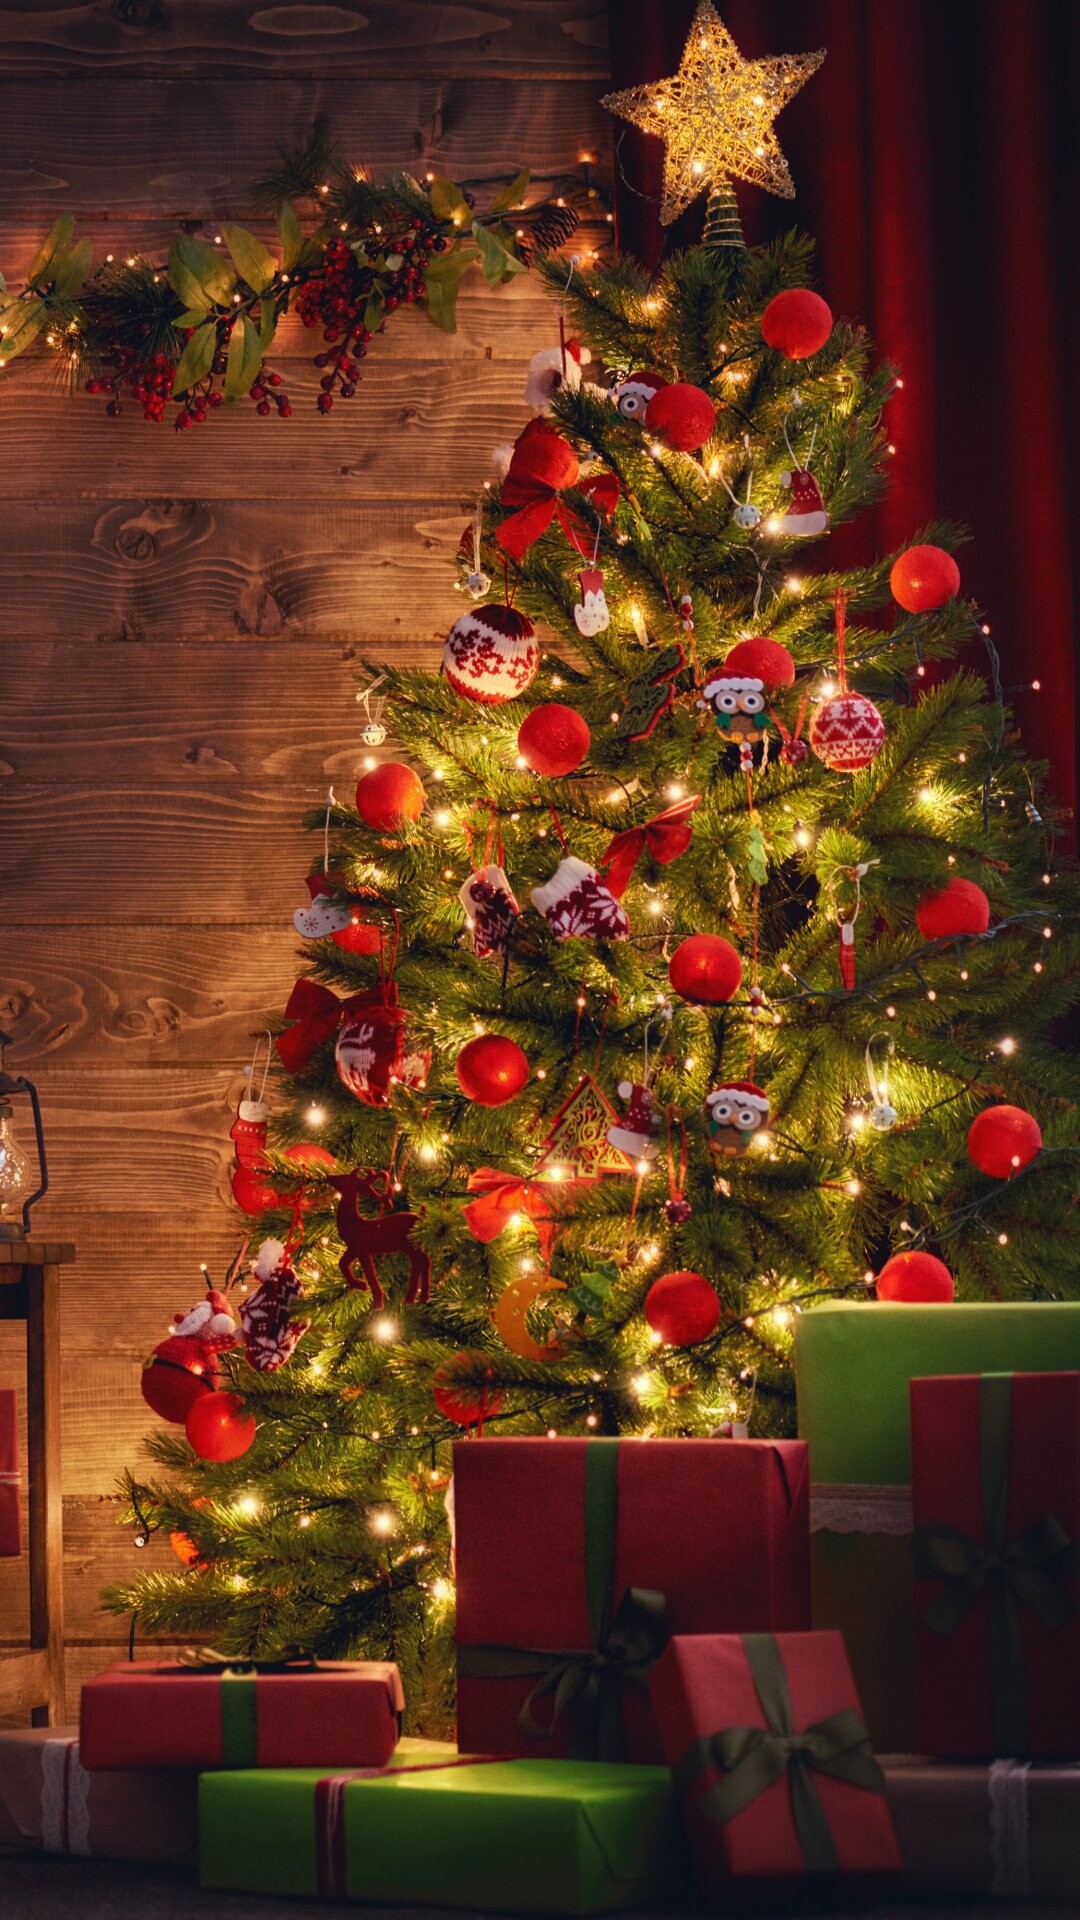 Christmas Gifts: Holiday tree, The practice of exchanging presents, Fairy lights. 1080x1920 Full HD Wallpaper.